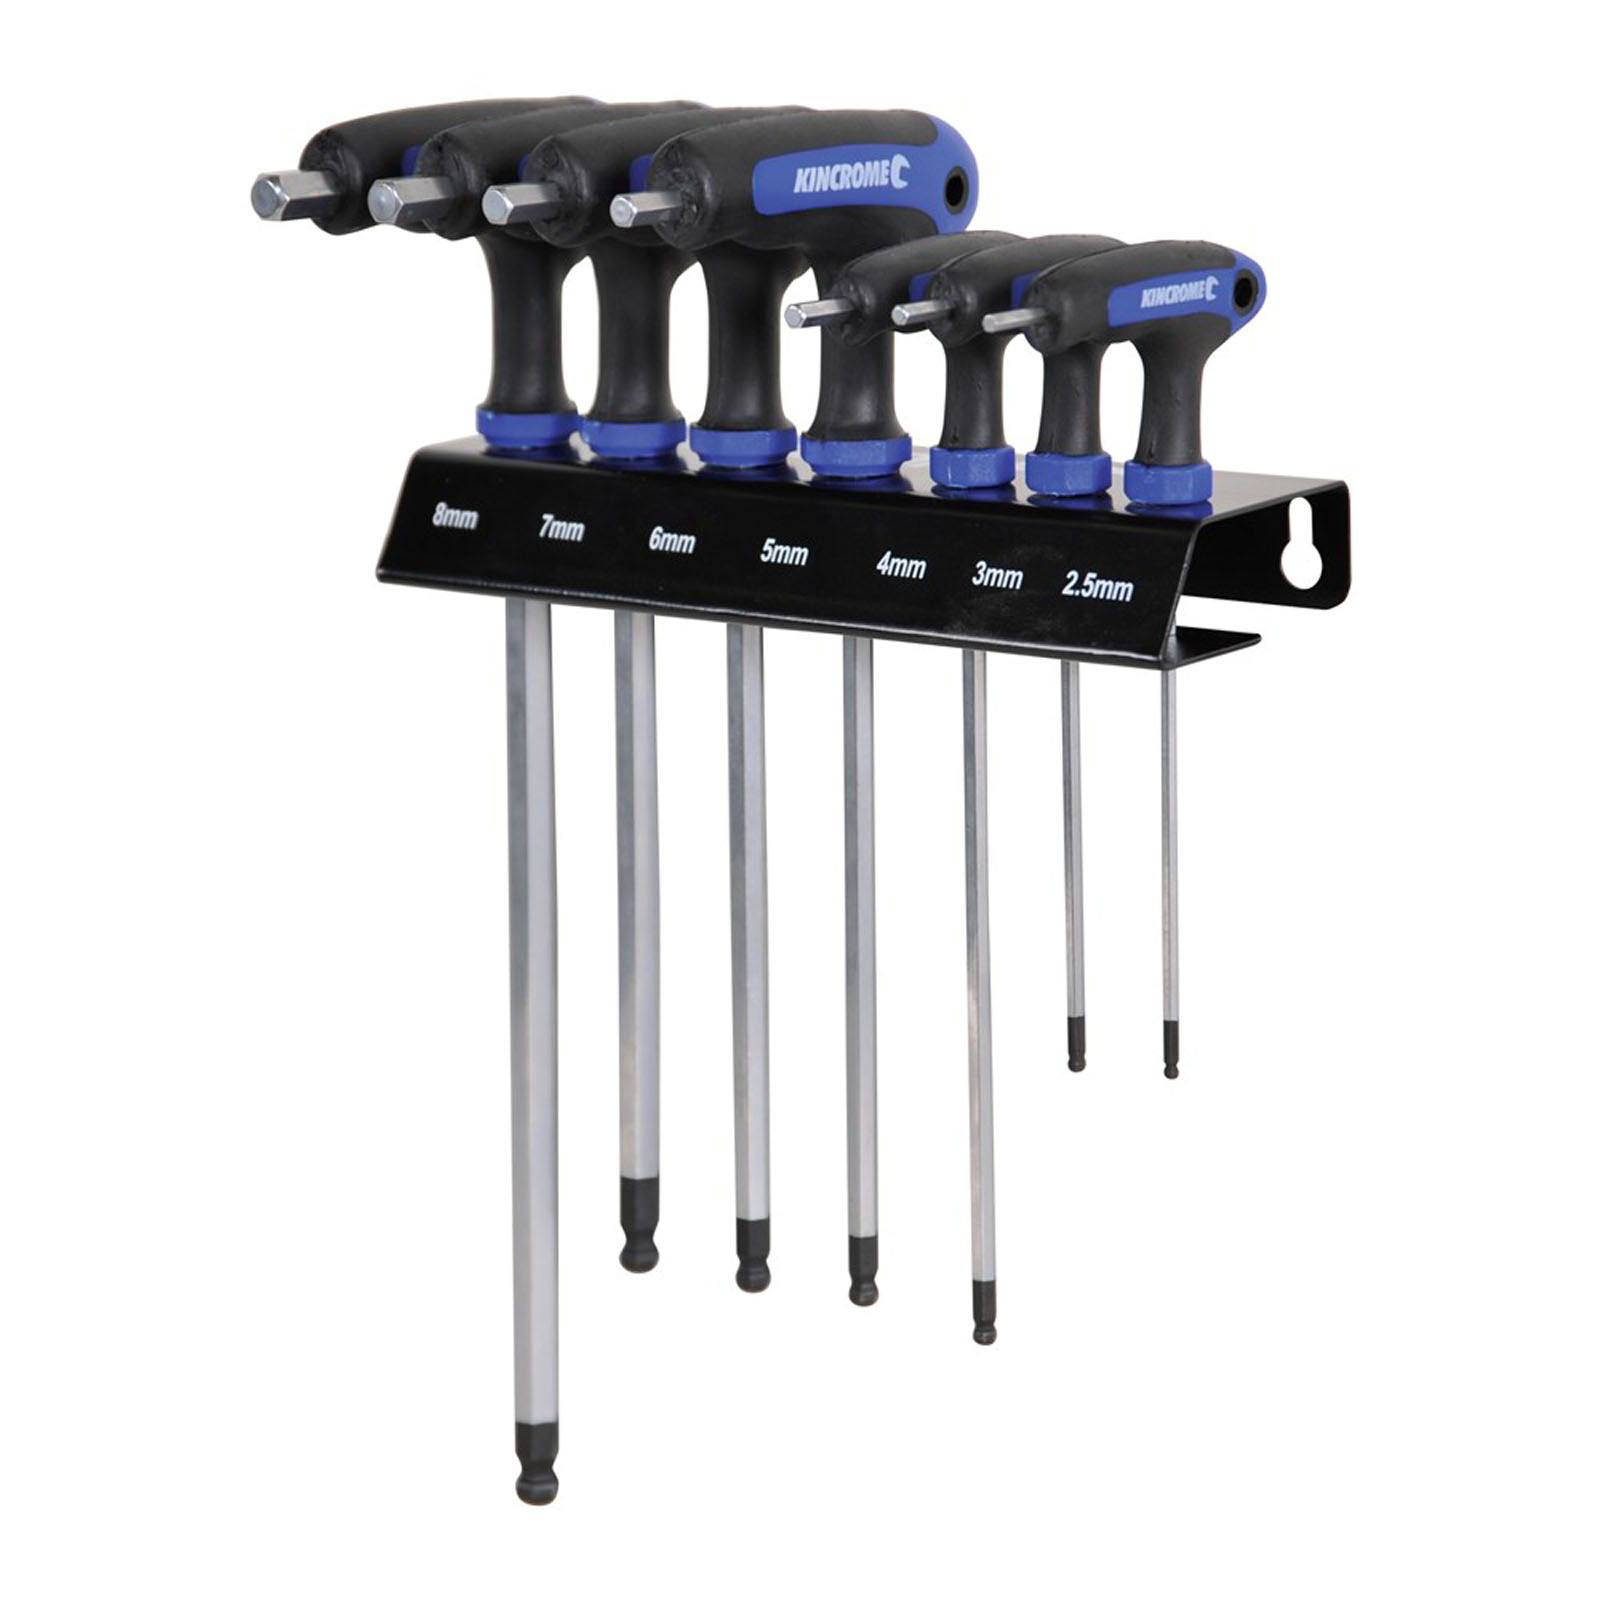 T-handle Hex Key Wrench Set 7 Piece Metric